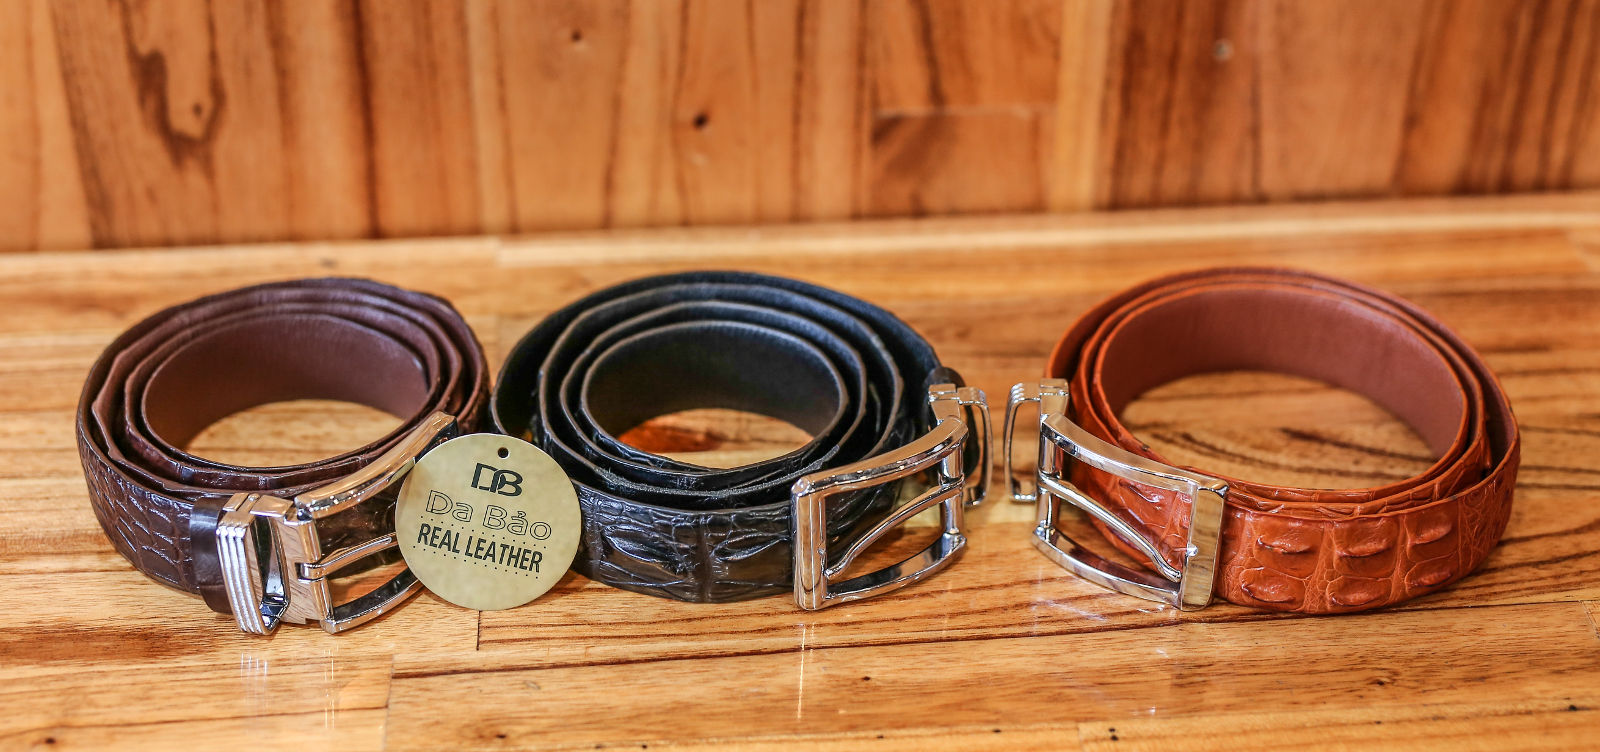 Hoi An Real Leather - Da Bao Real Leather: Crocodile leather belts in brown and black.